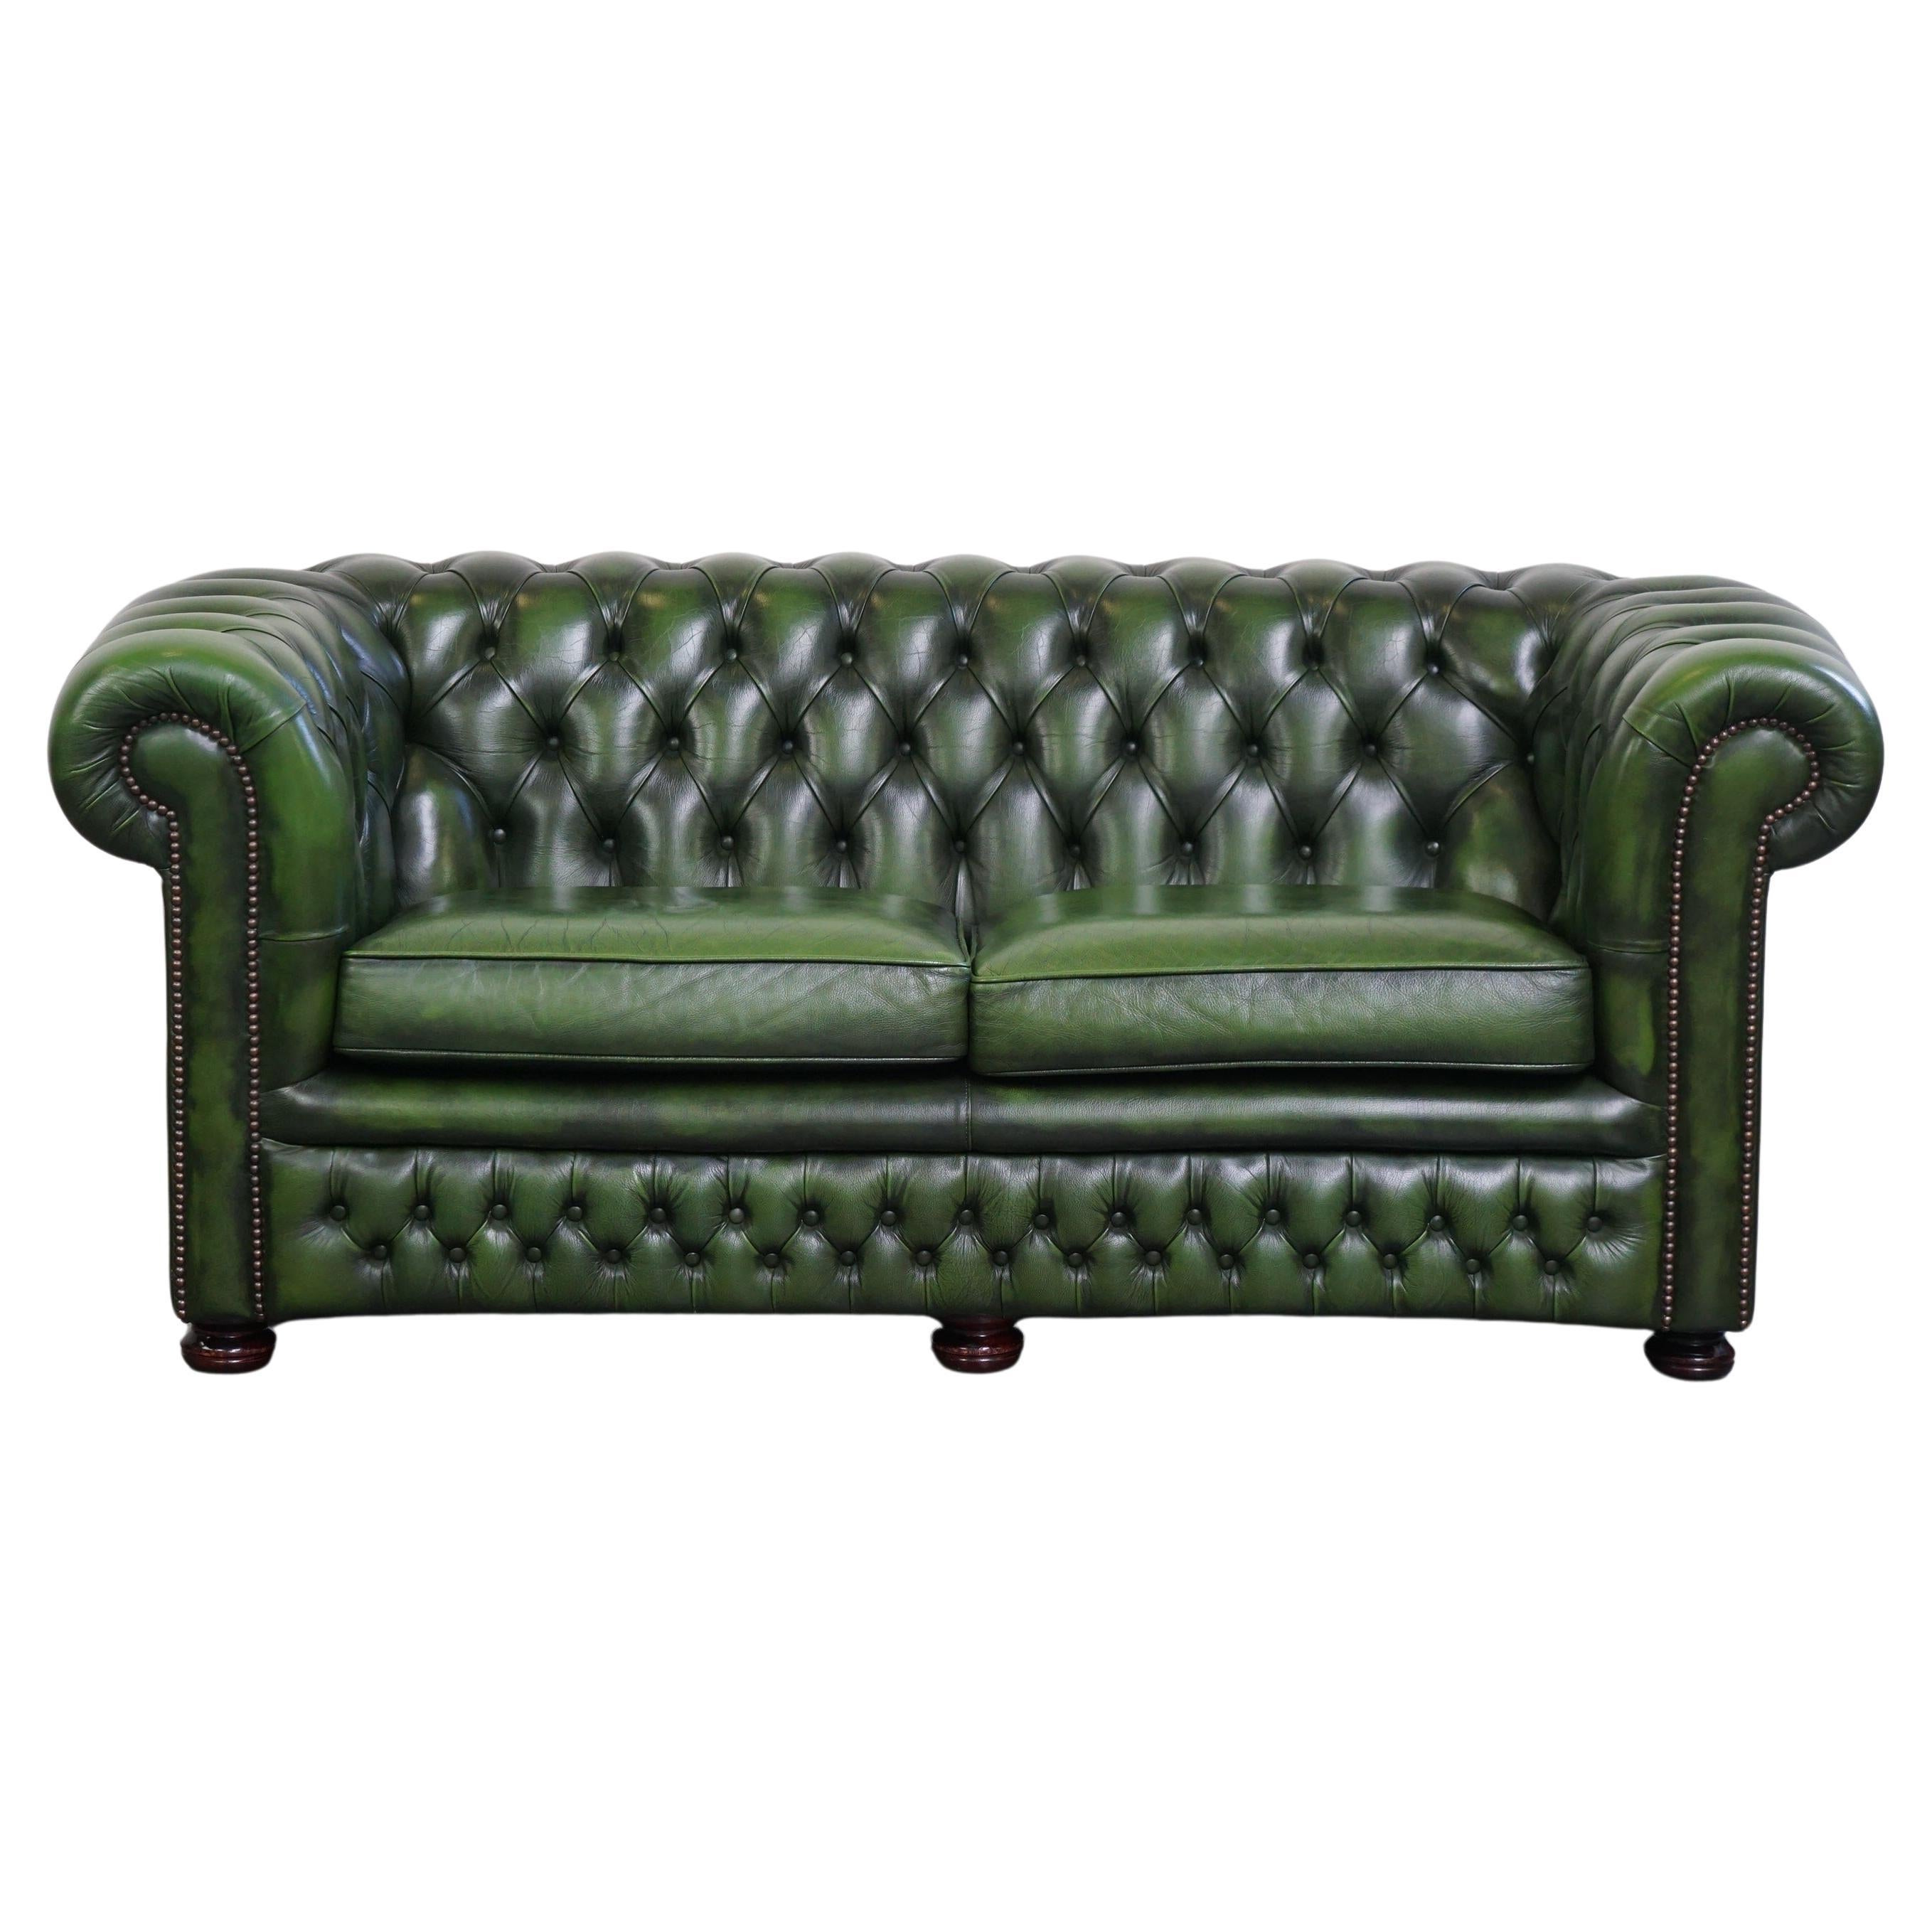 Very beautiful green leather English Springvale Chesterfield sofa, 2-seater